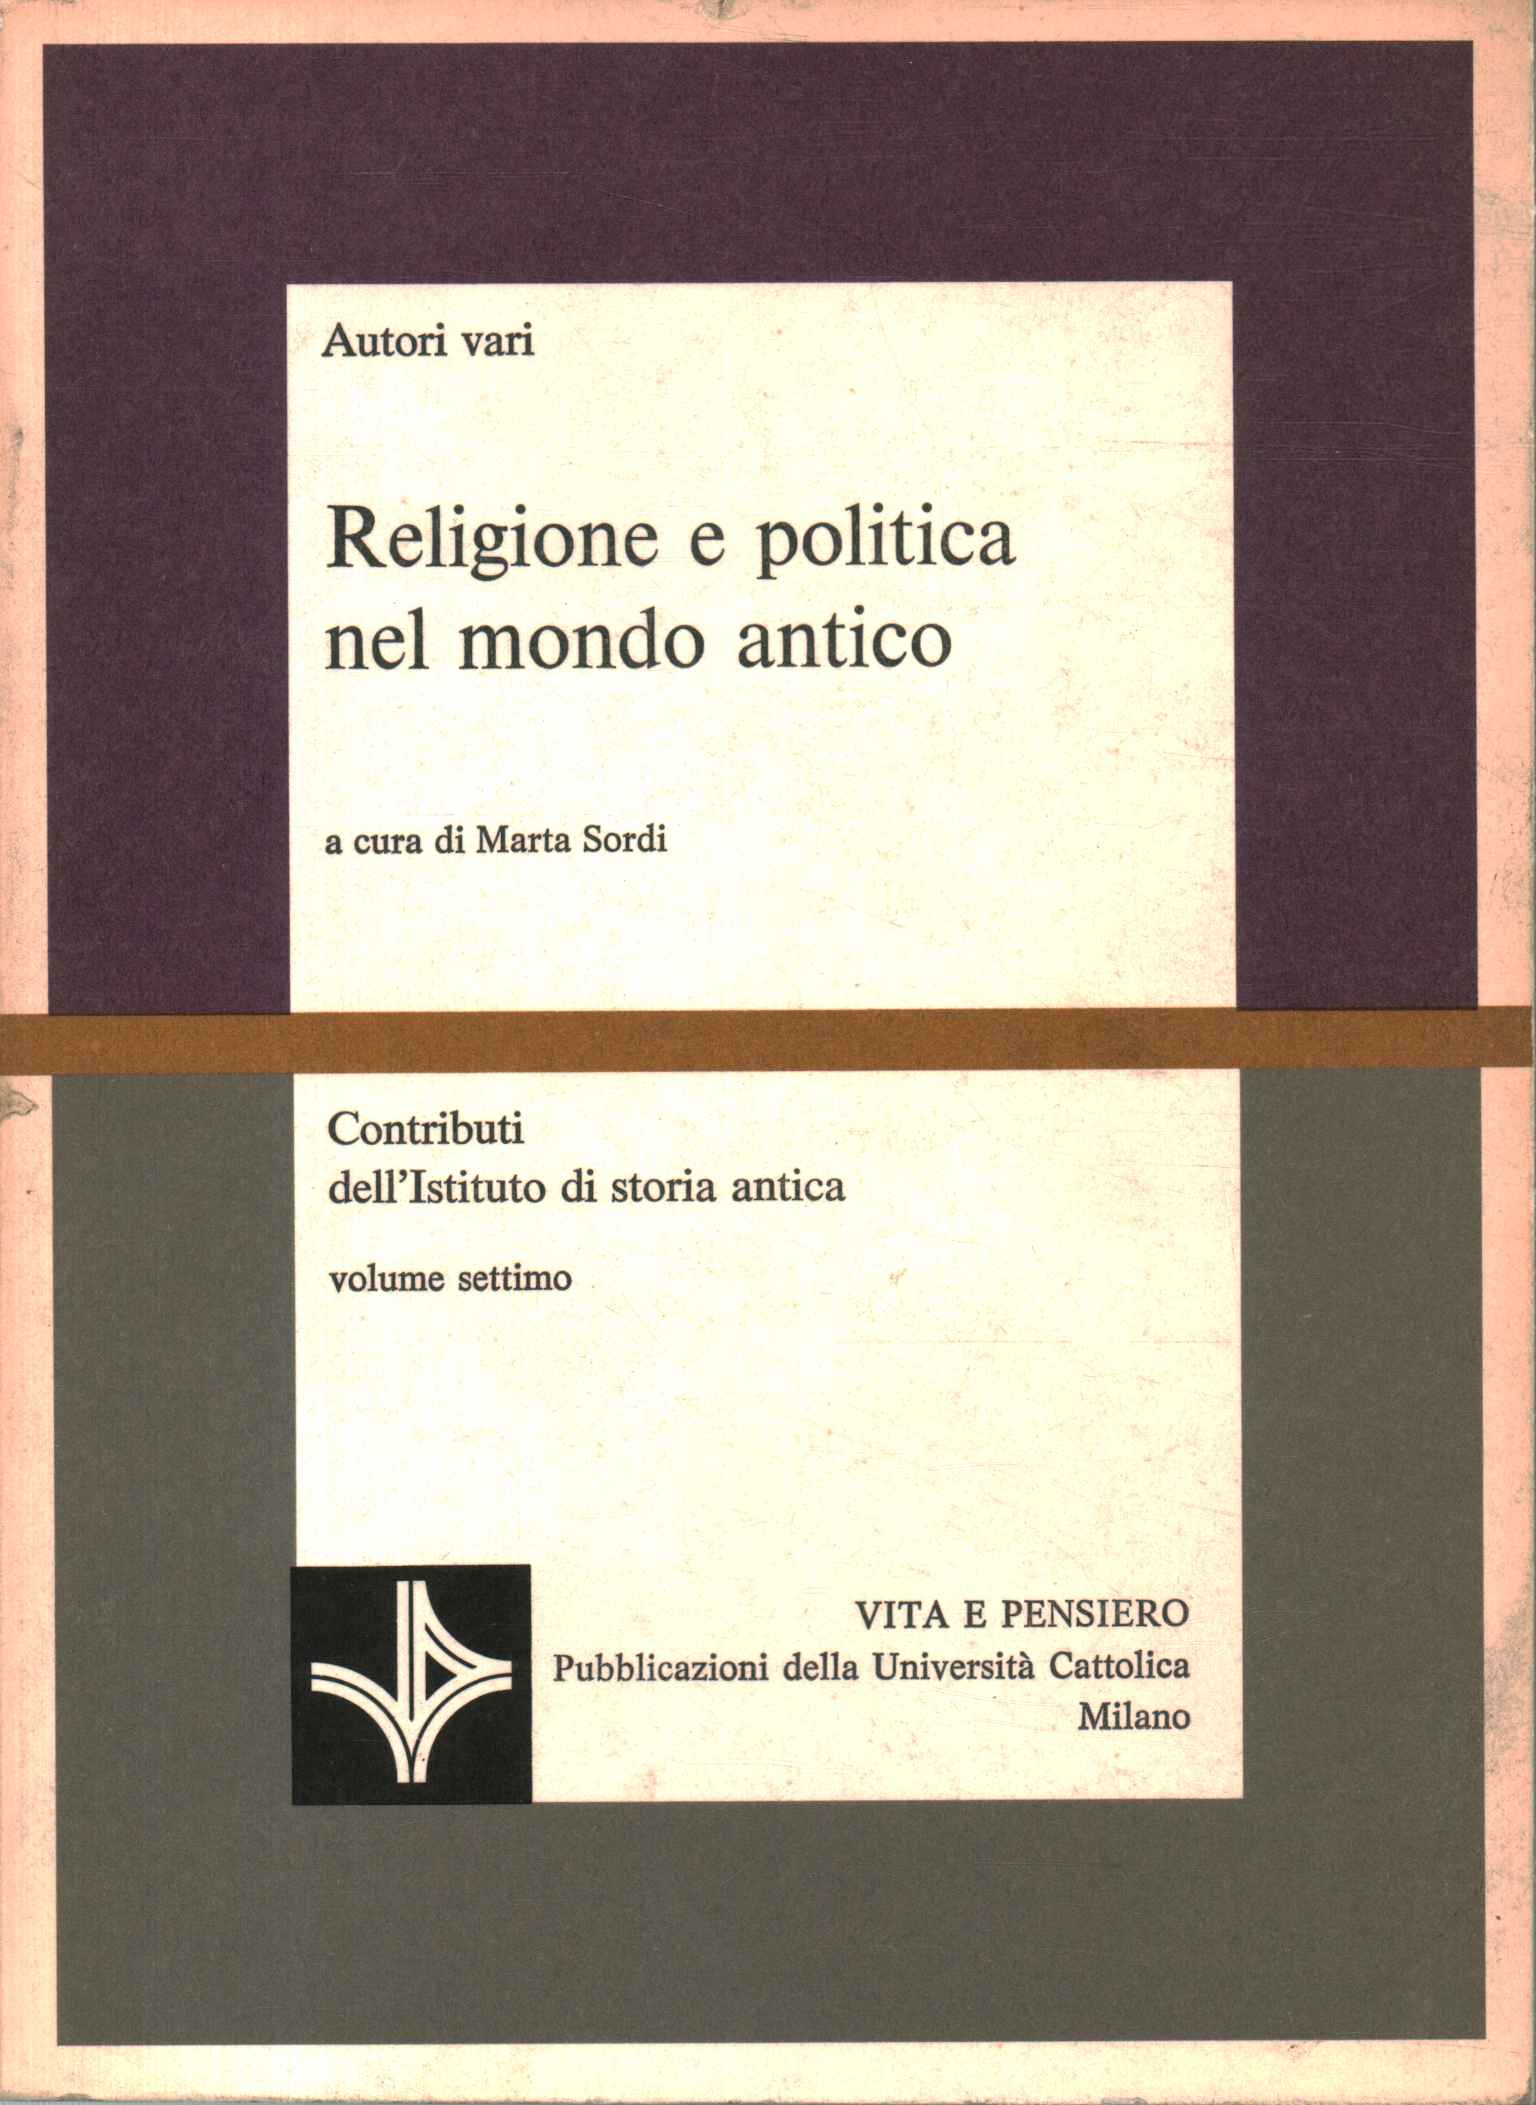 Religion and politics in the ancient world.%2,Religion and politics in the ancient world.%2,Religion and politics in the ancient world